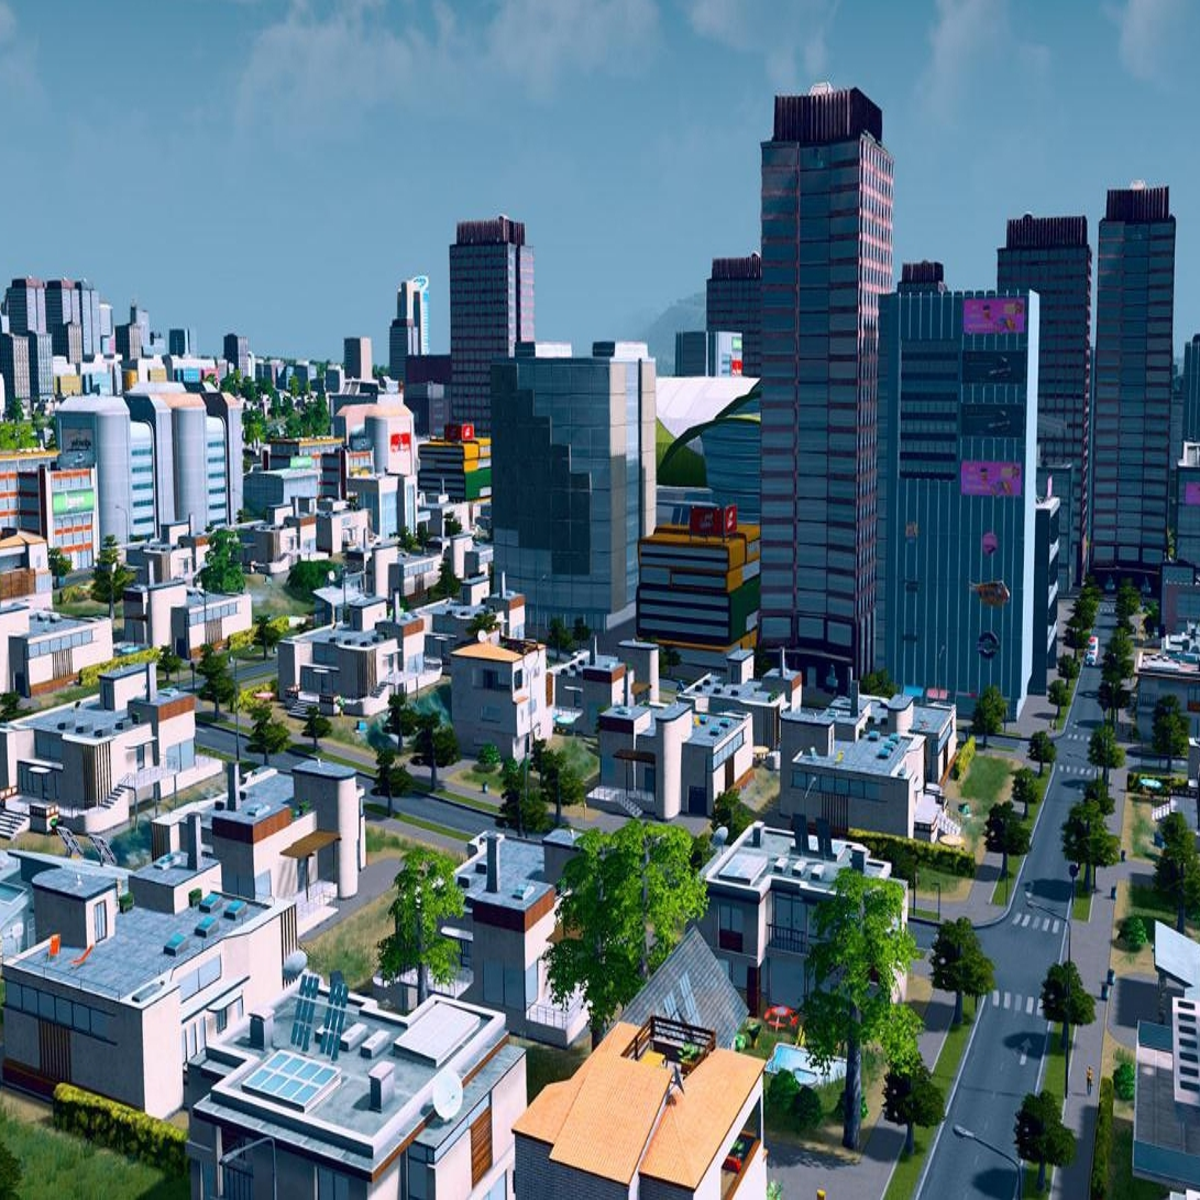 Cities: Skylines is free to try on Steam right now (update) - Polygon